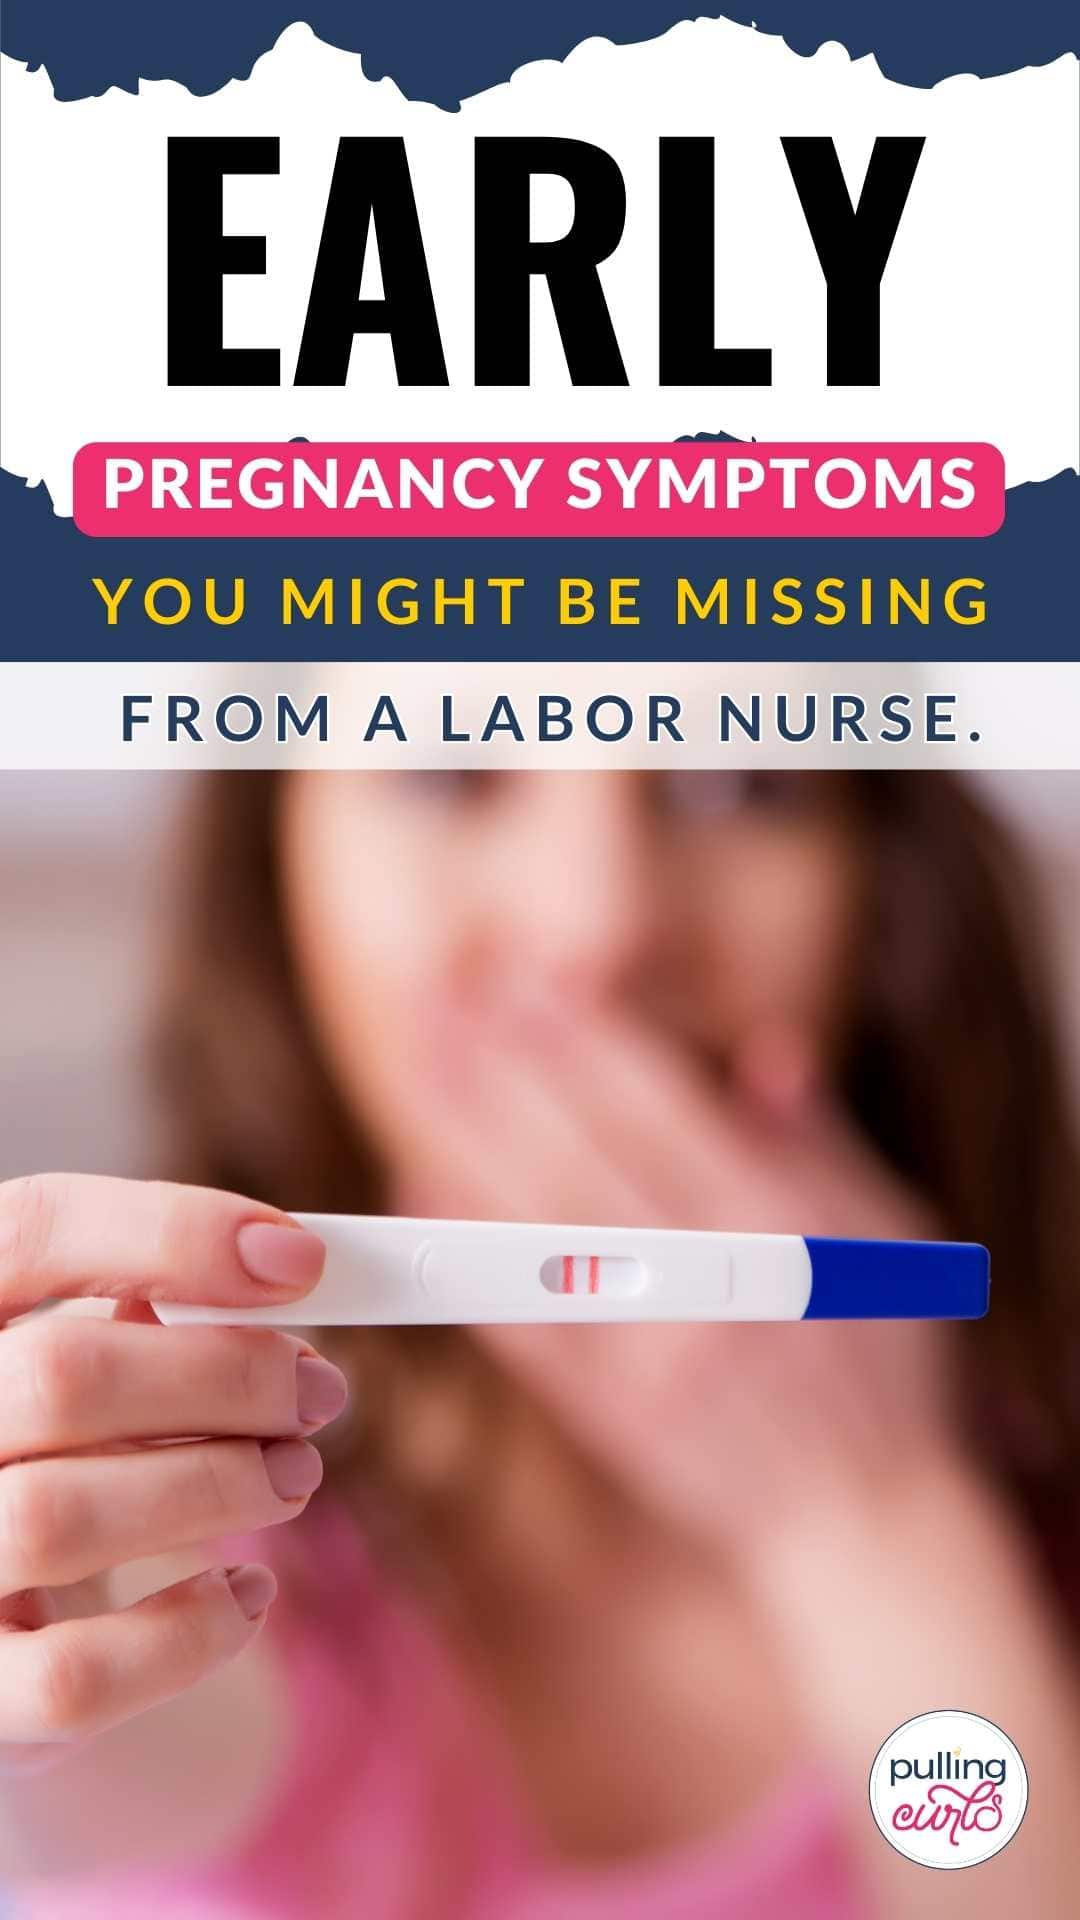 Some early pregnancy symptoms go unnoticed. Look out for subtle signs like fatigue, mood swings, and food aversions. Pay attention to your body's cues and consult your healthcare provider for confirmation. Stay informed to ensure a healthy pregnancy journey. Early pregnancy symptoms, pregnancy signs, prenatal care, healthcare guidance, maternal health, pregnancy awareness. via @pullingcurls